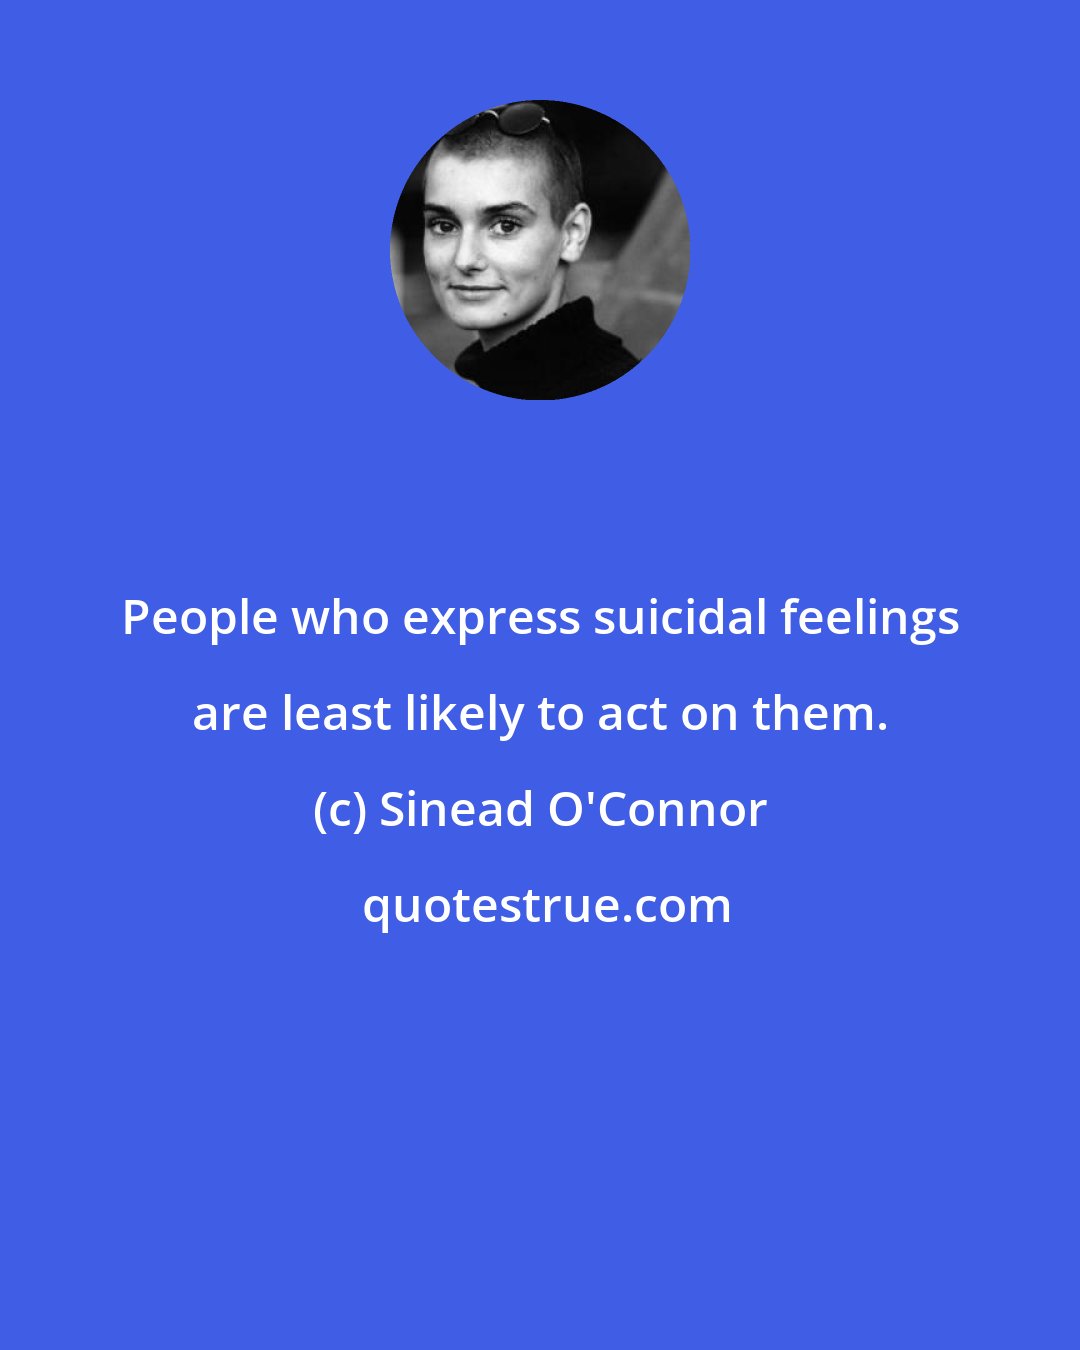 Sinead O'Connor: People who express suicidal feelings are least likely to act on them.